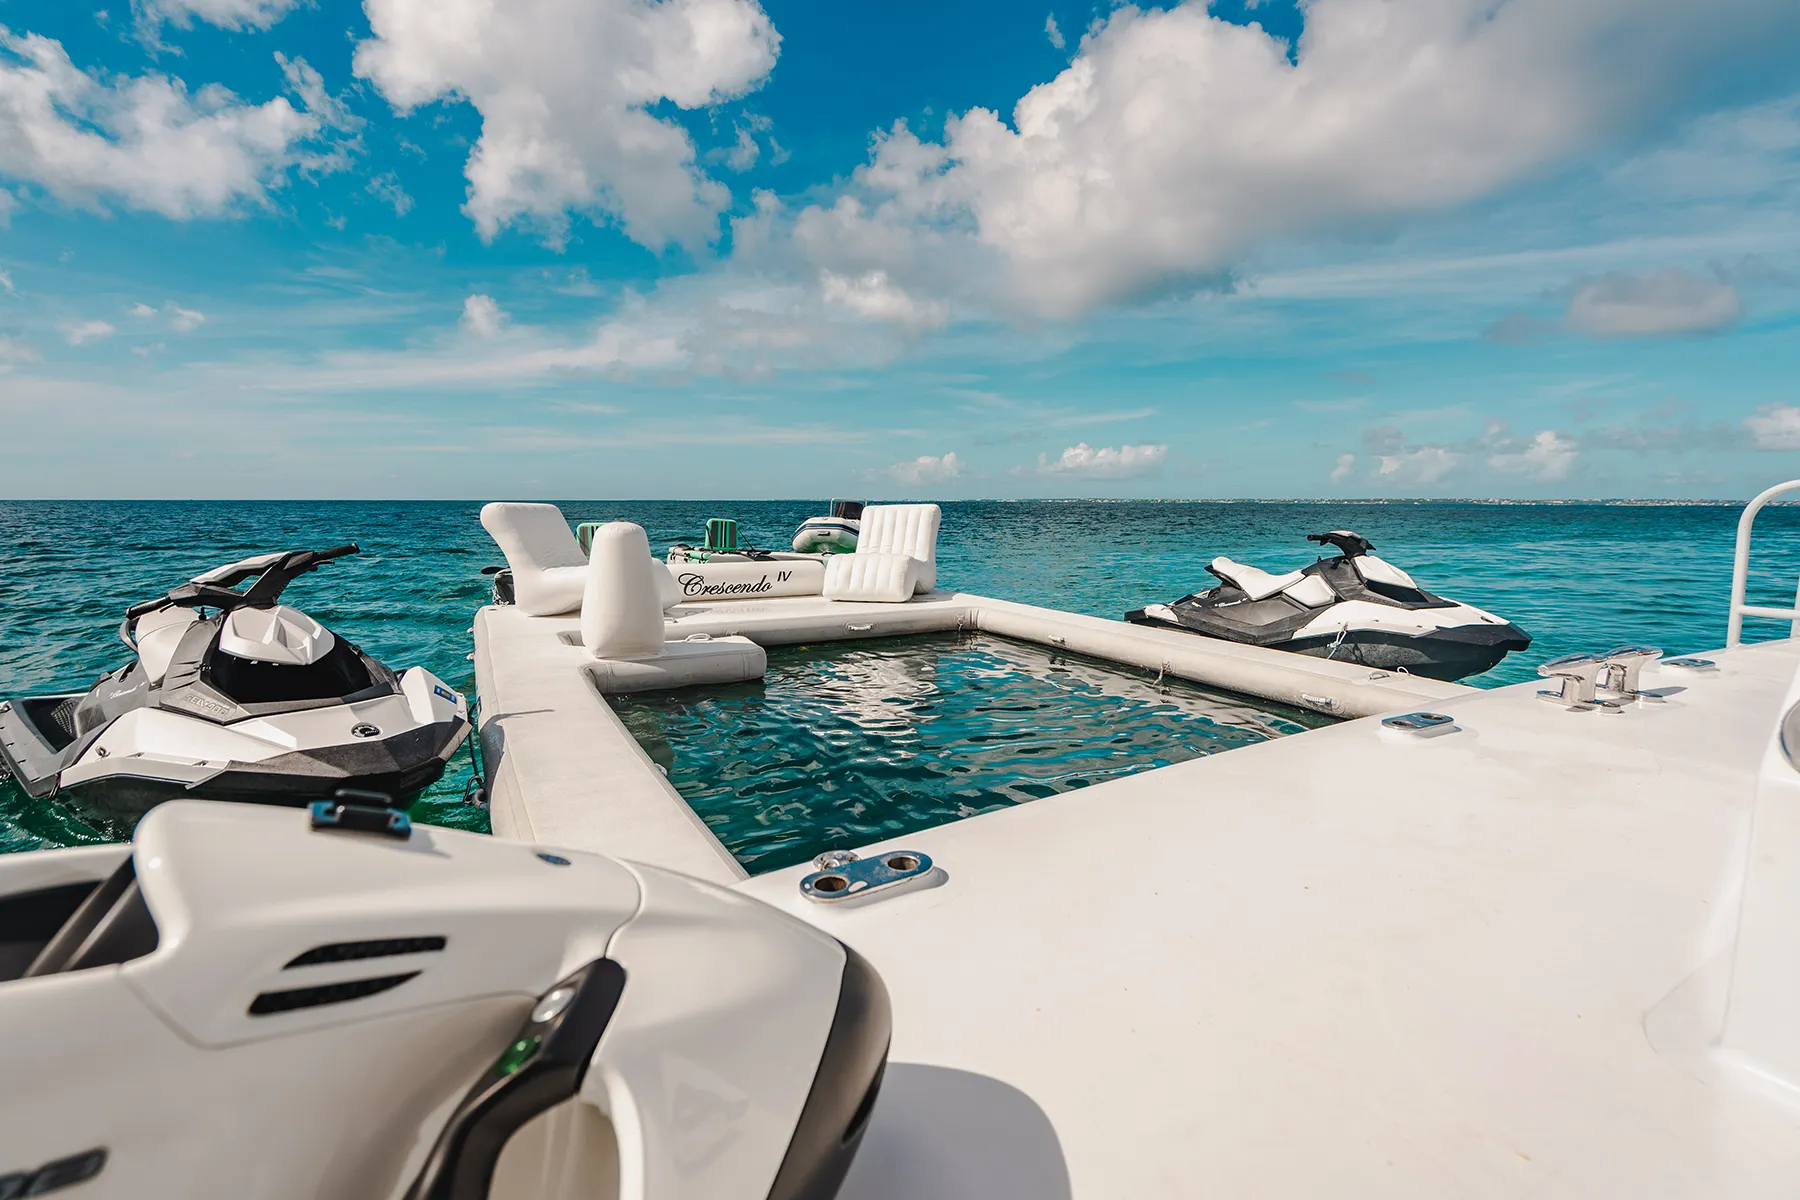 FunSize Beach Club SeaPool with Wave Chairs from superyacht MY Crescendo IV